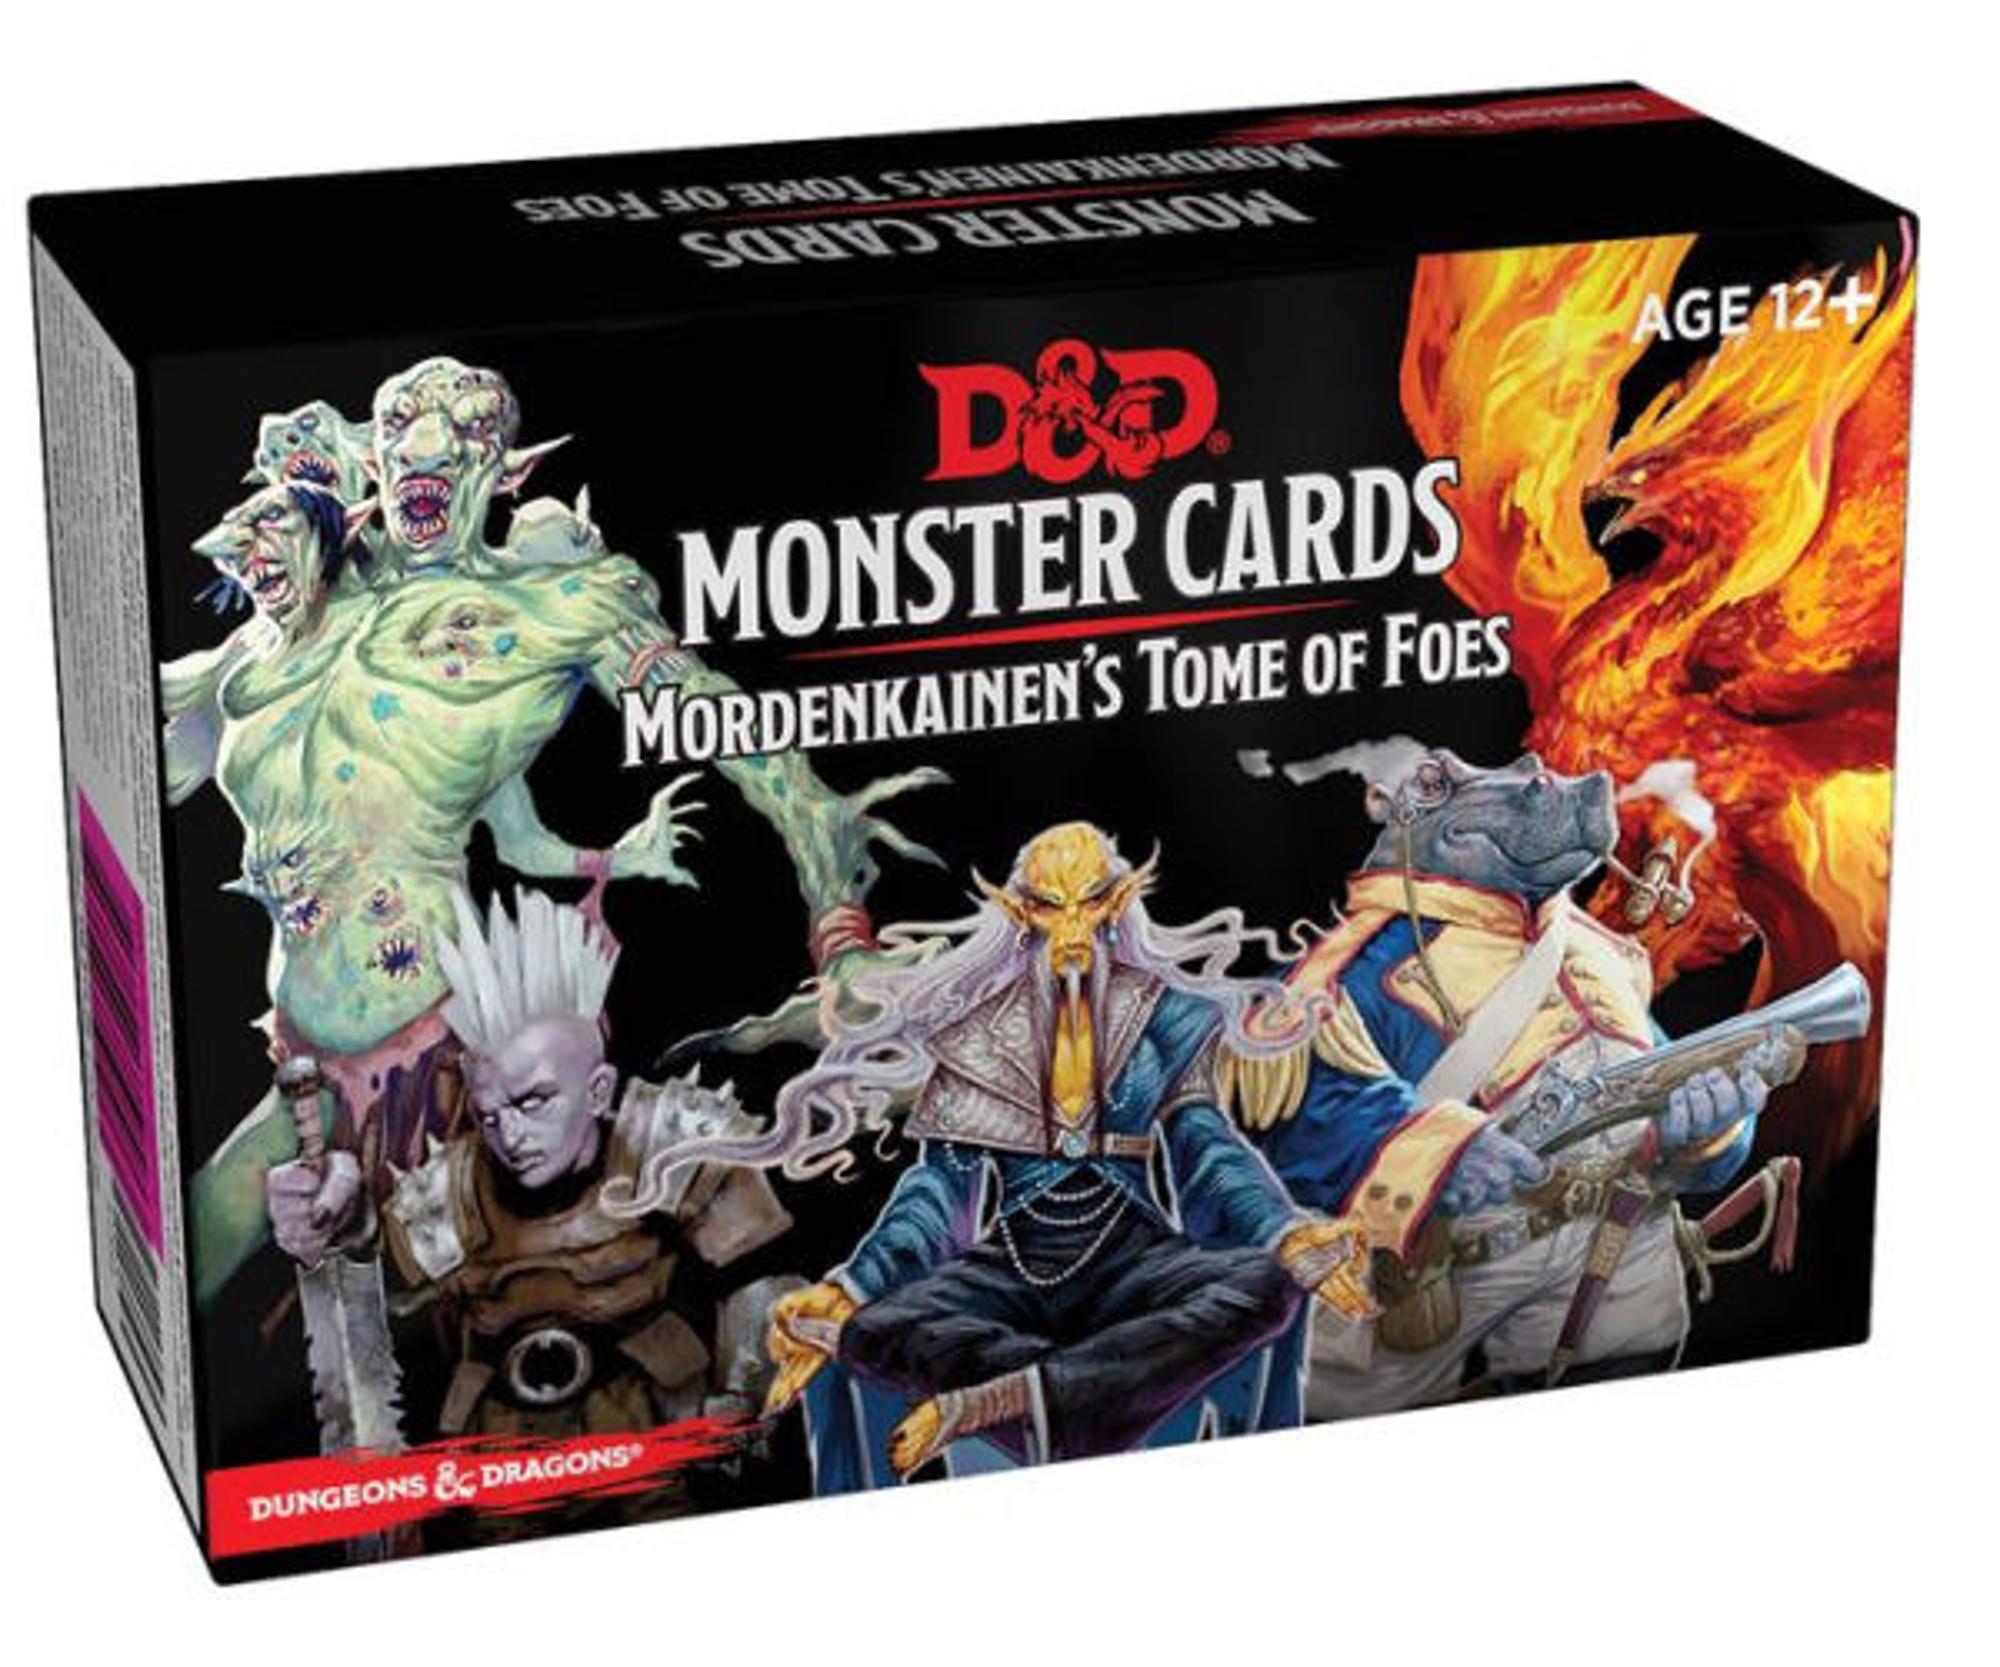 D&D Monster Cards - Mordenkainens Tome of Foes